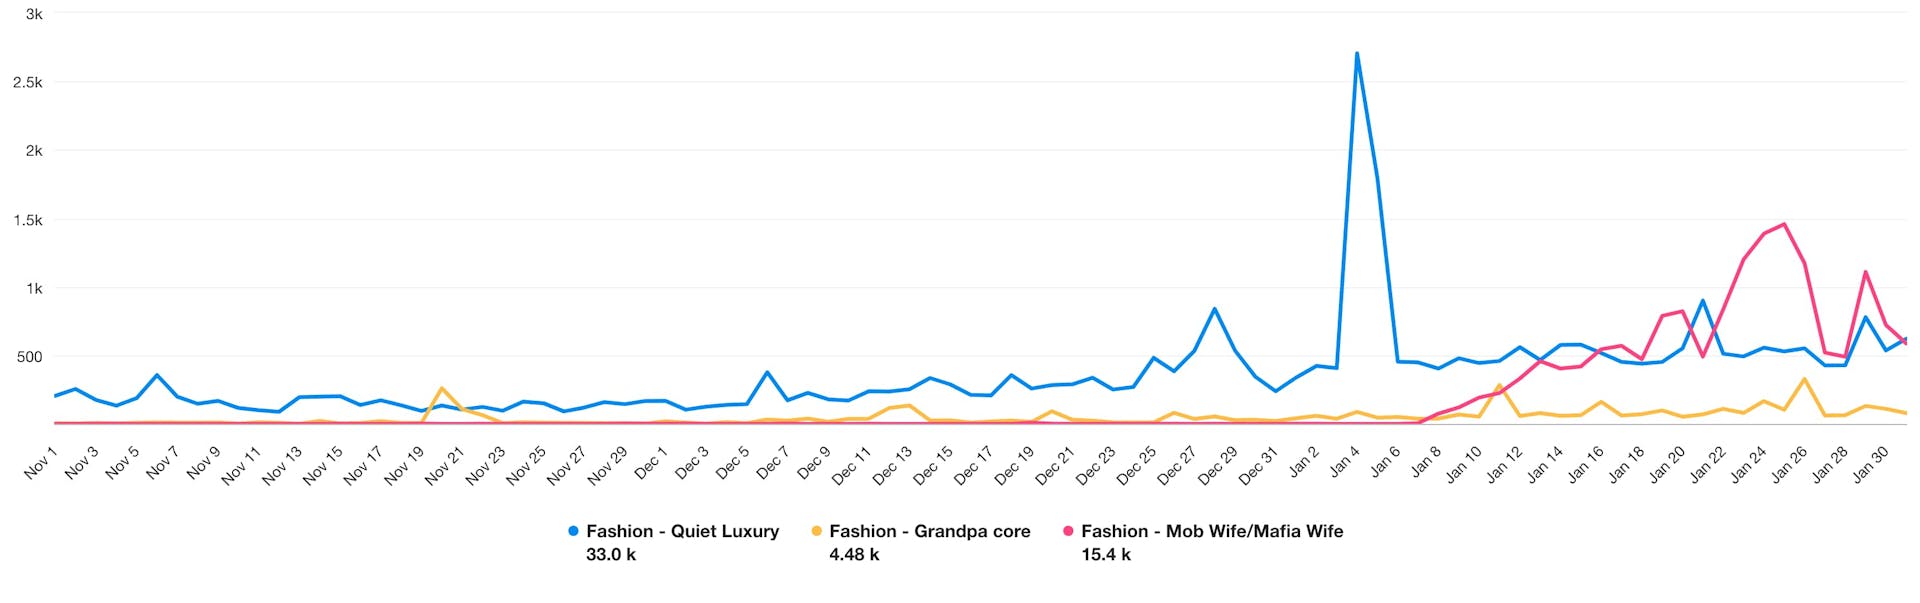 A chart comparing the volumes of mentions of grandpacore, mob wife, and quiet luxury trends from November through January. The chart shows that quiet luxury had the highest volume until mid-January, when mob wife aesthetic took over.